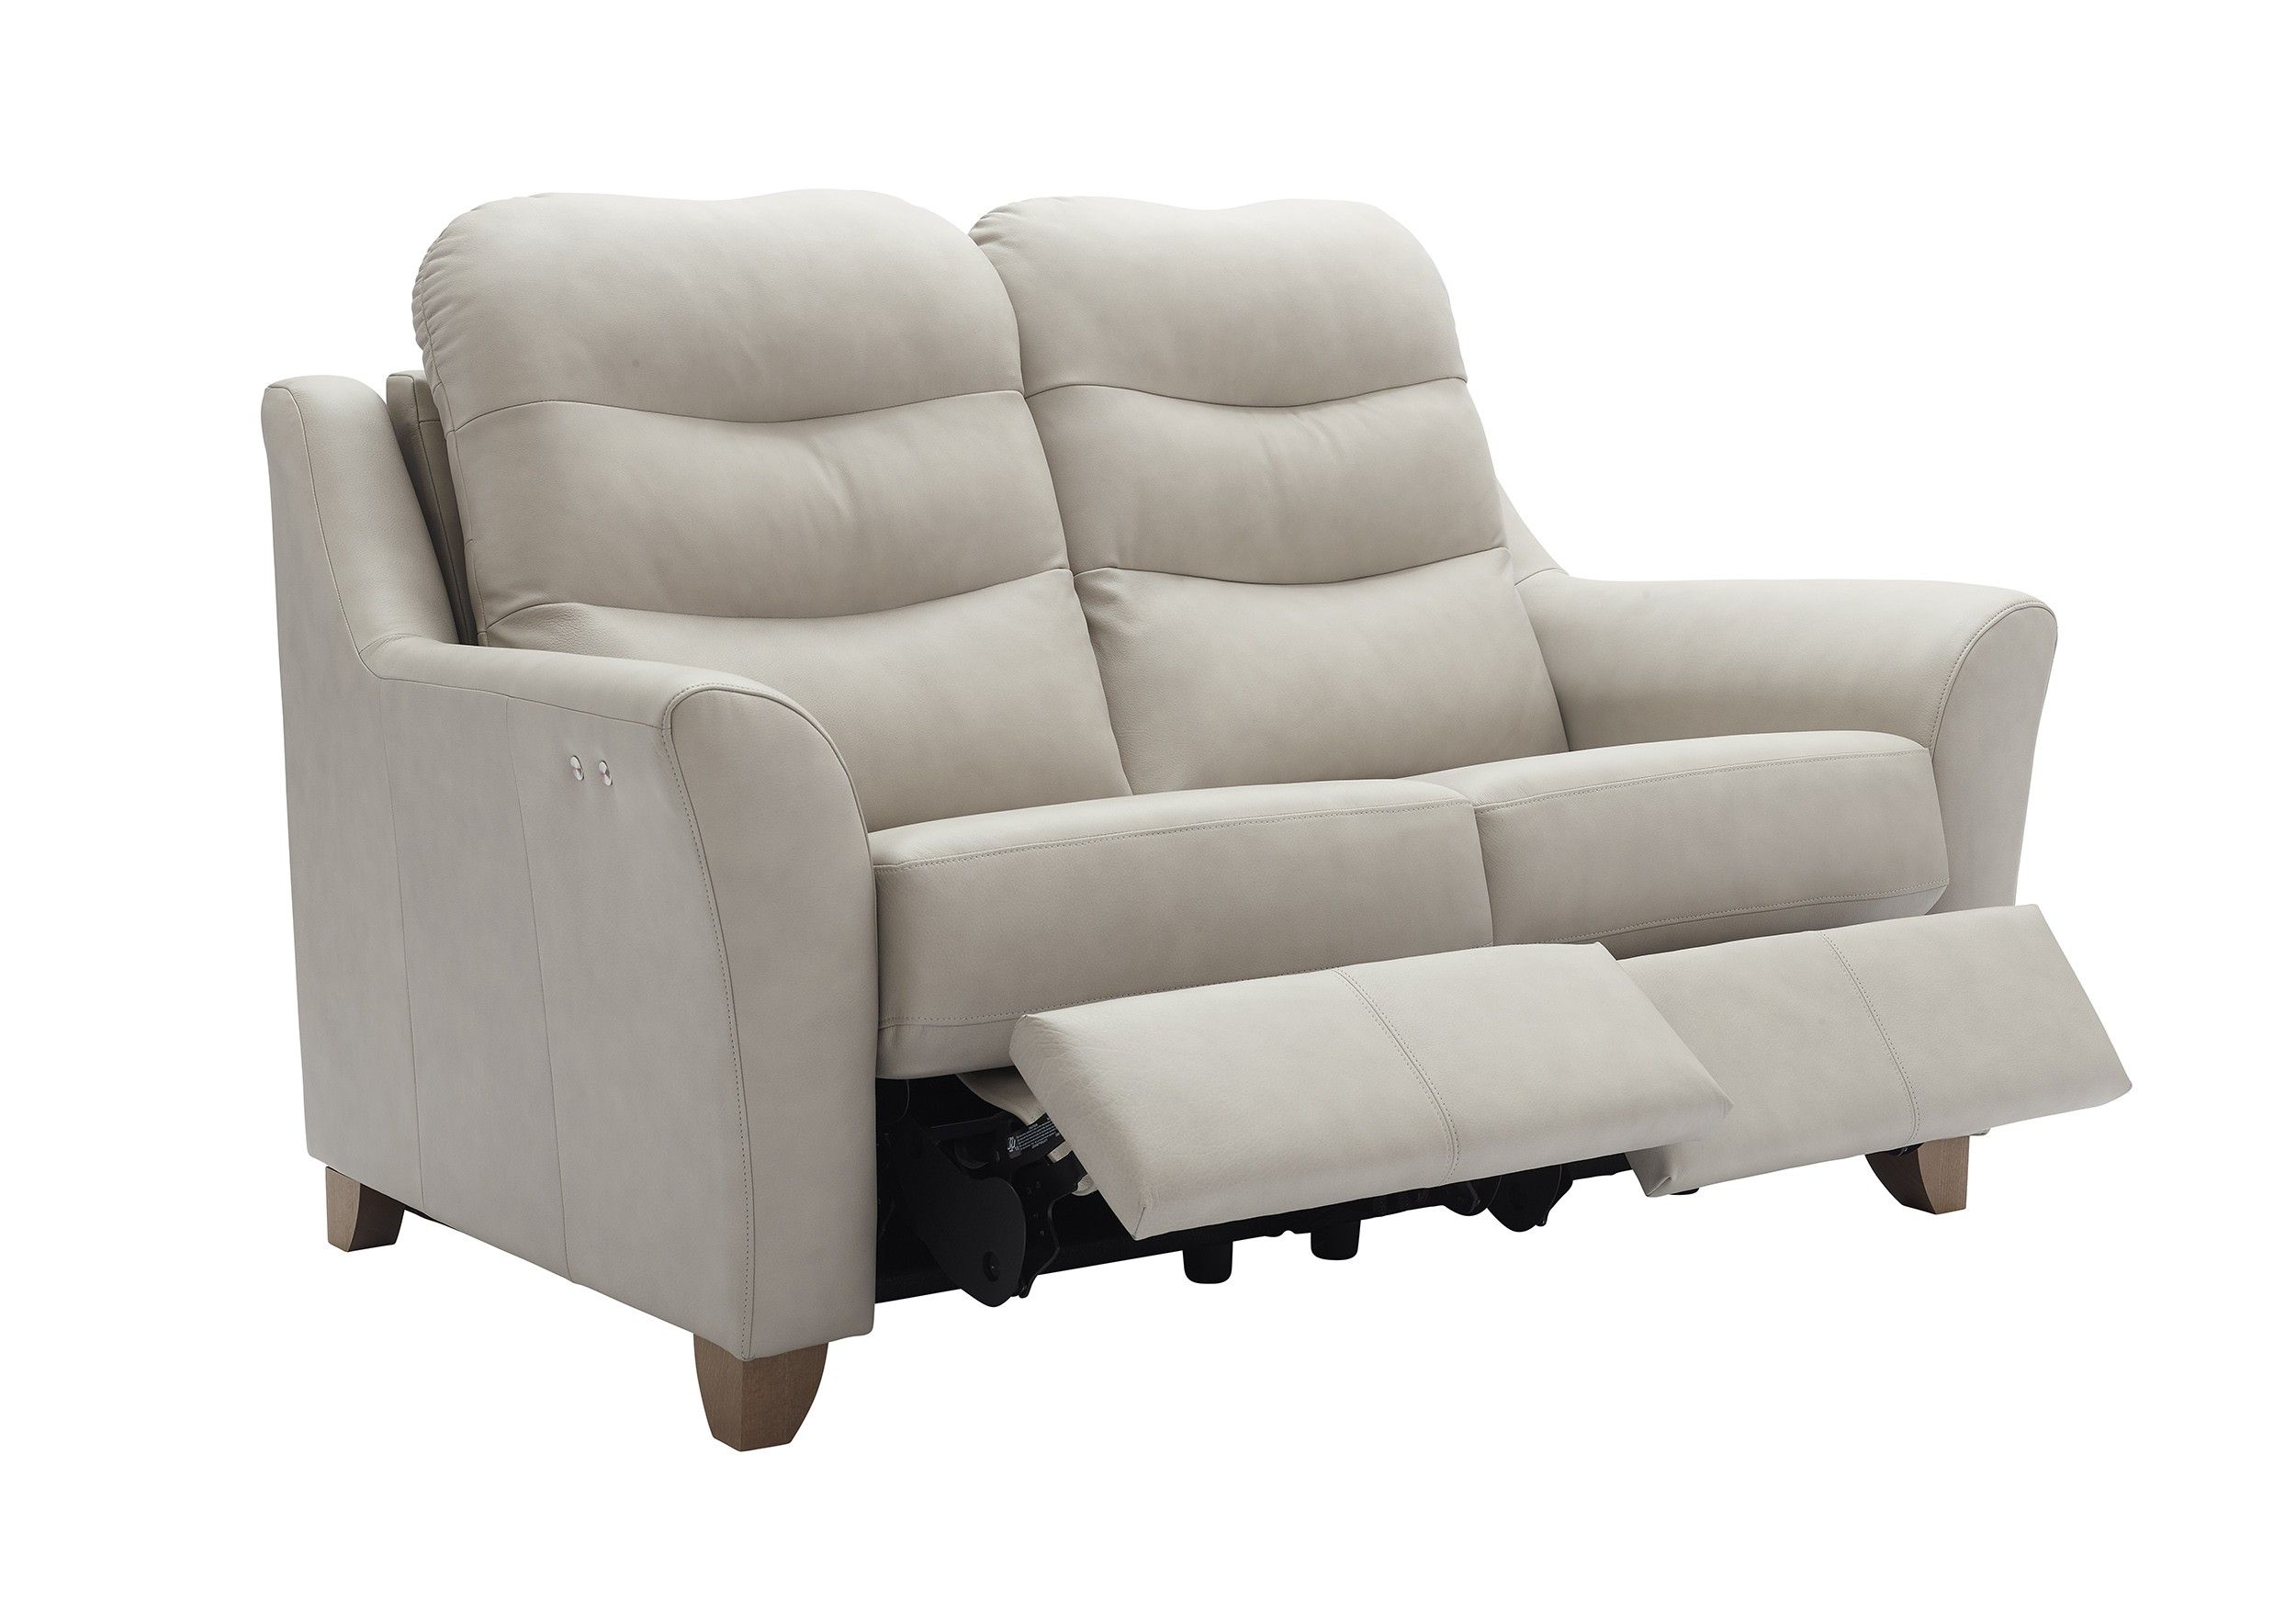 G Plan Tate Leather 2 Seater Electric Double Recliner Sofa | Tr In Tate Ii Sofa Chairs (Photo 6 of 25)